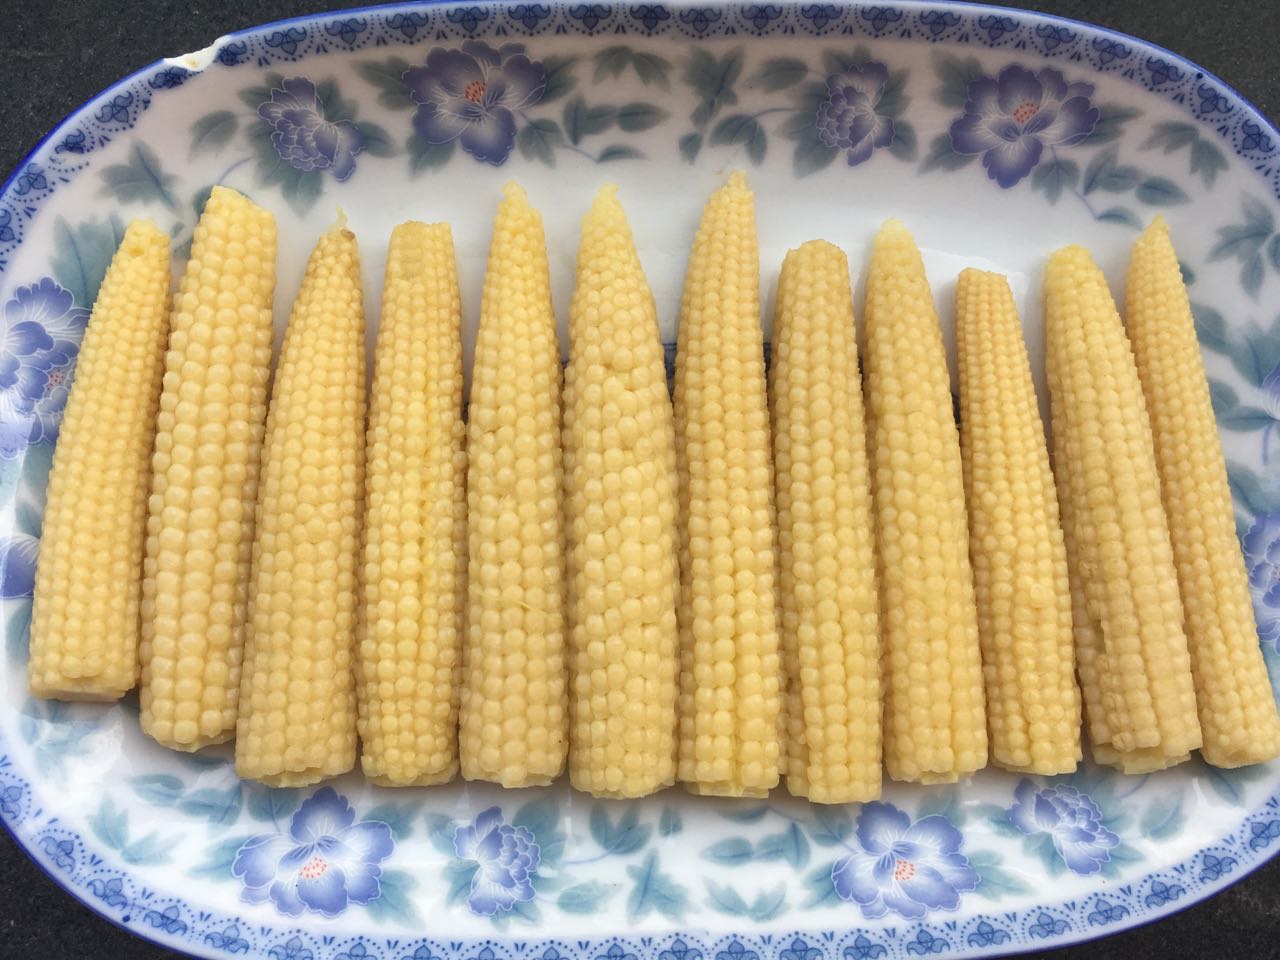 New crop canned babycorn